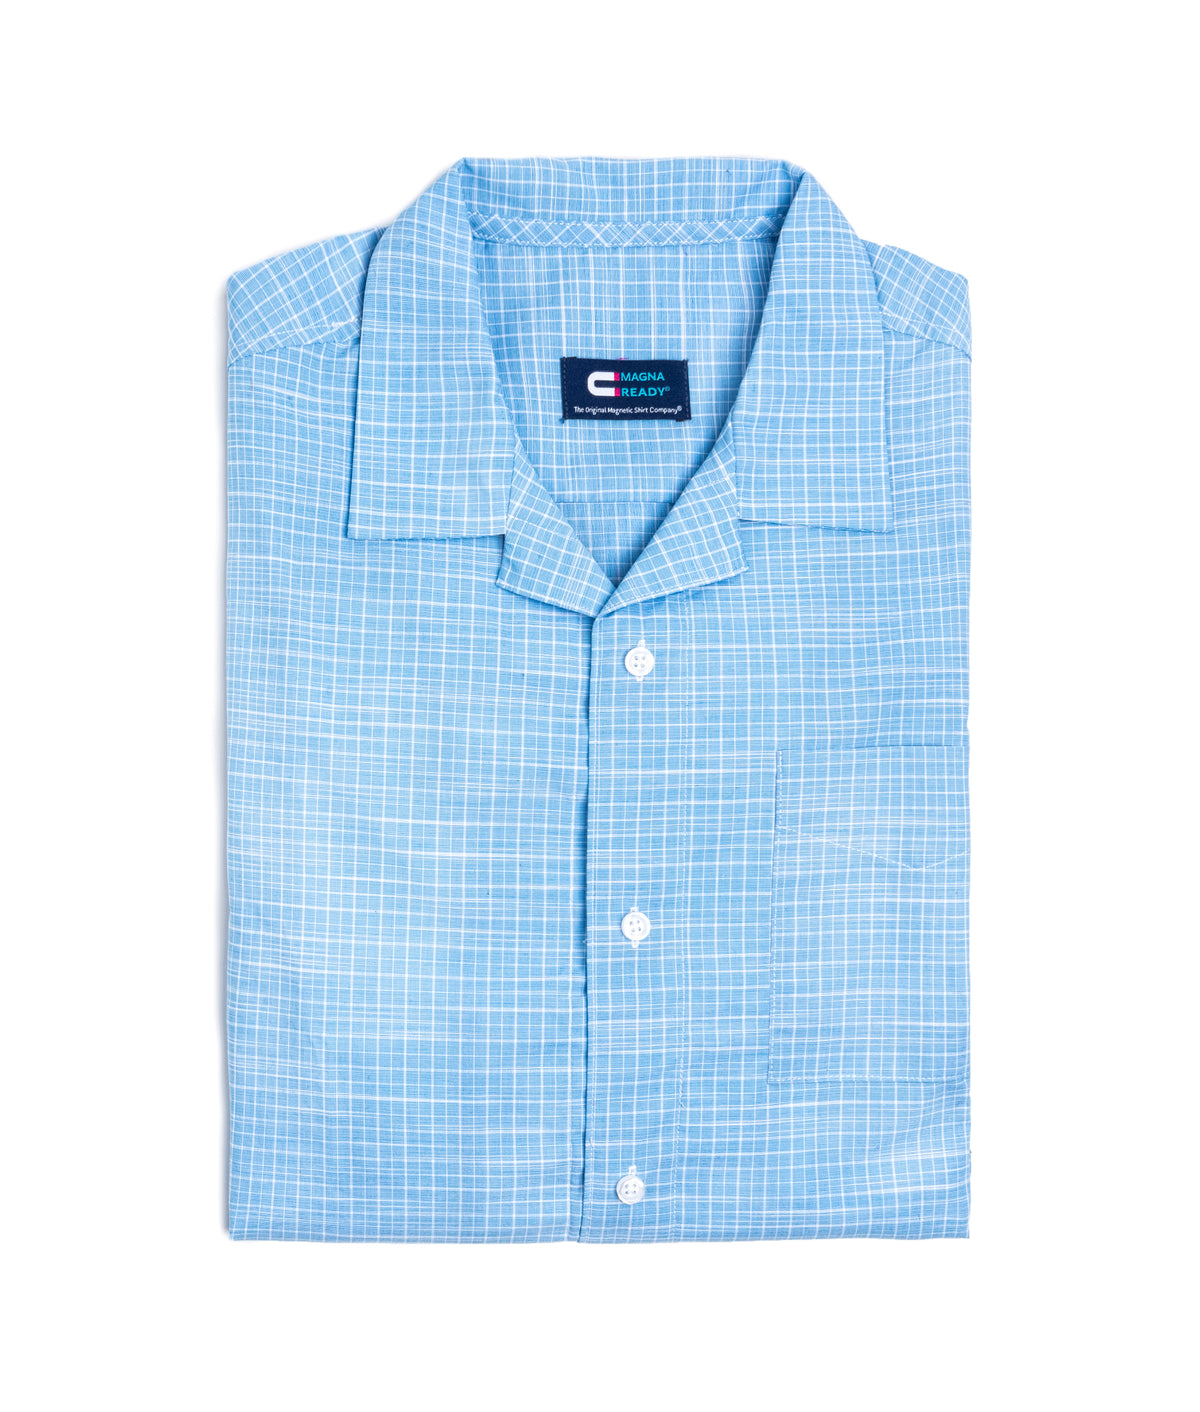 Untucked Light Blue Cotton Casual Mini Grid Camp Shirt With Magnetic Closures